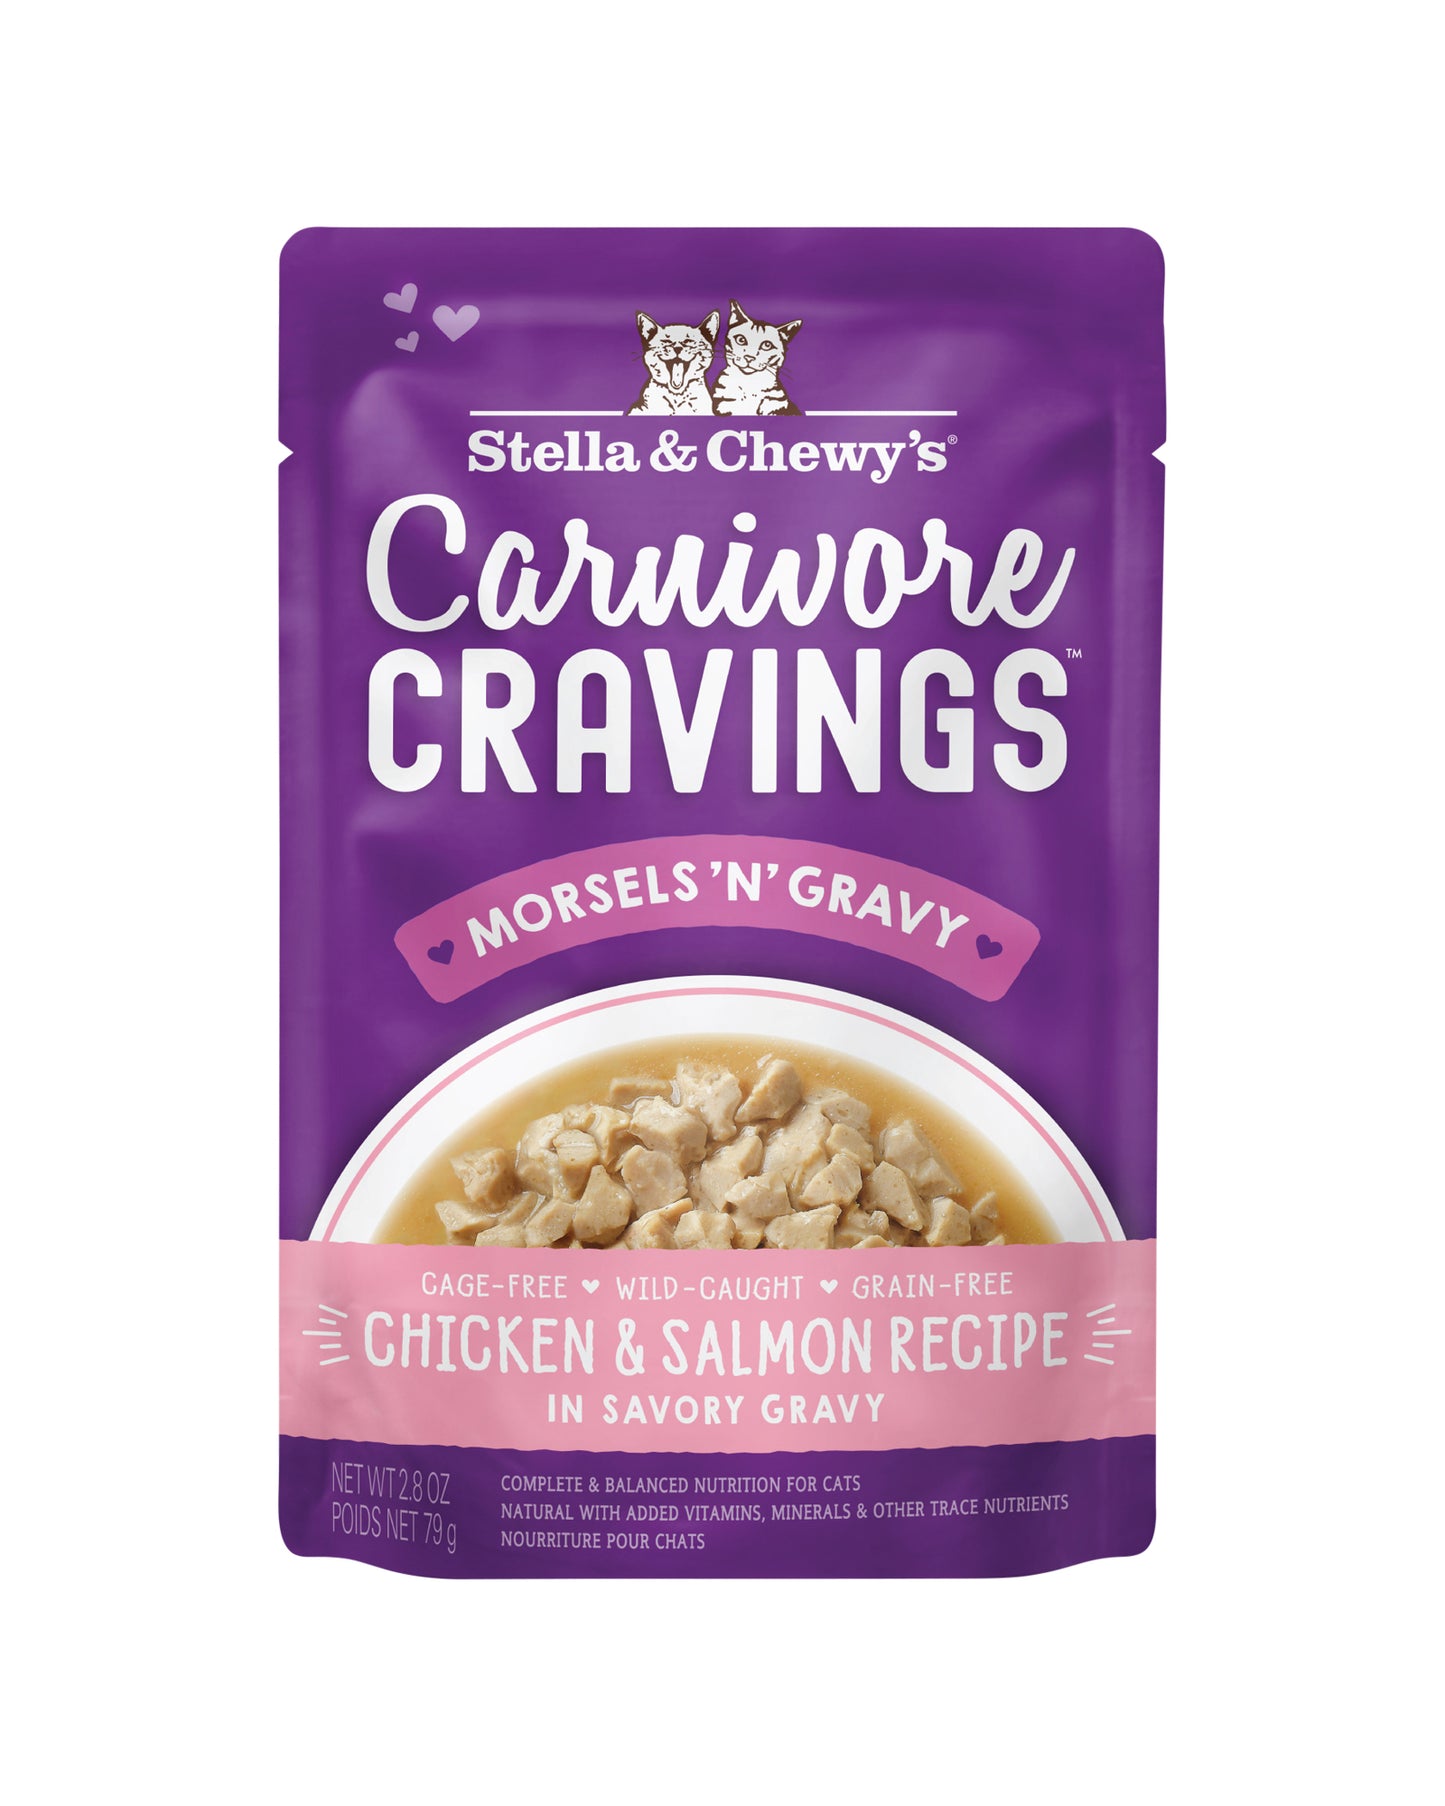 Carnivore Cravings Chicken and Salmon Shredded Cat Food - Pack of 24